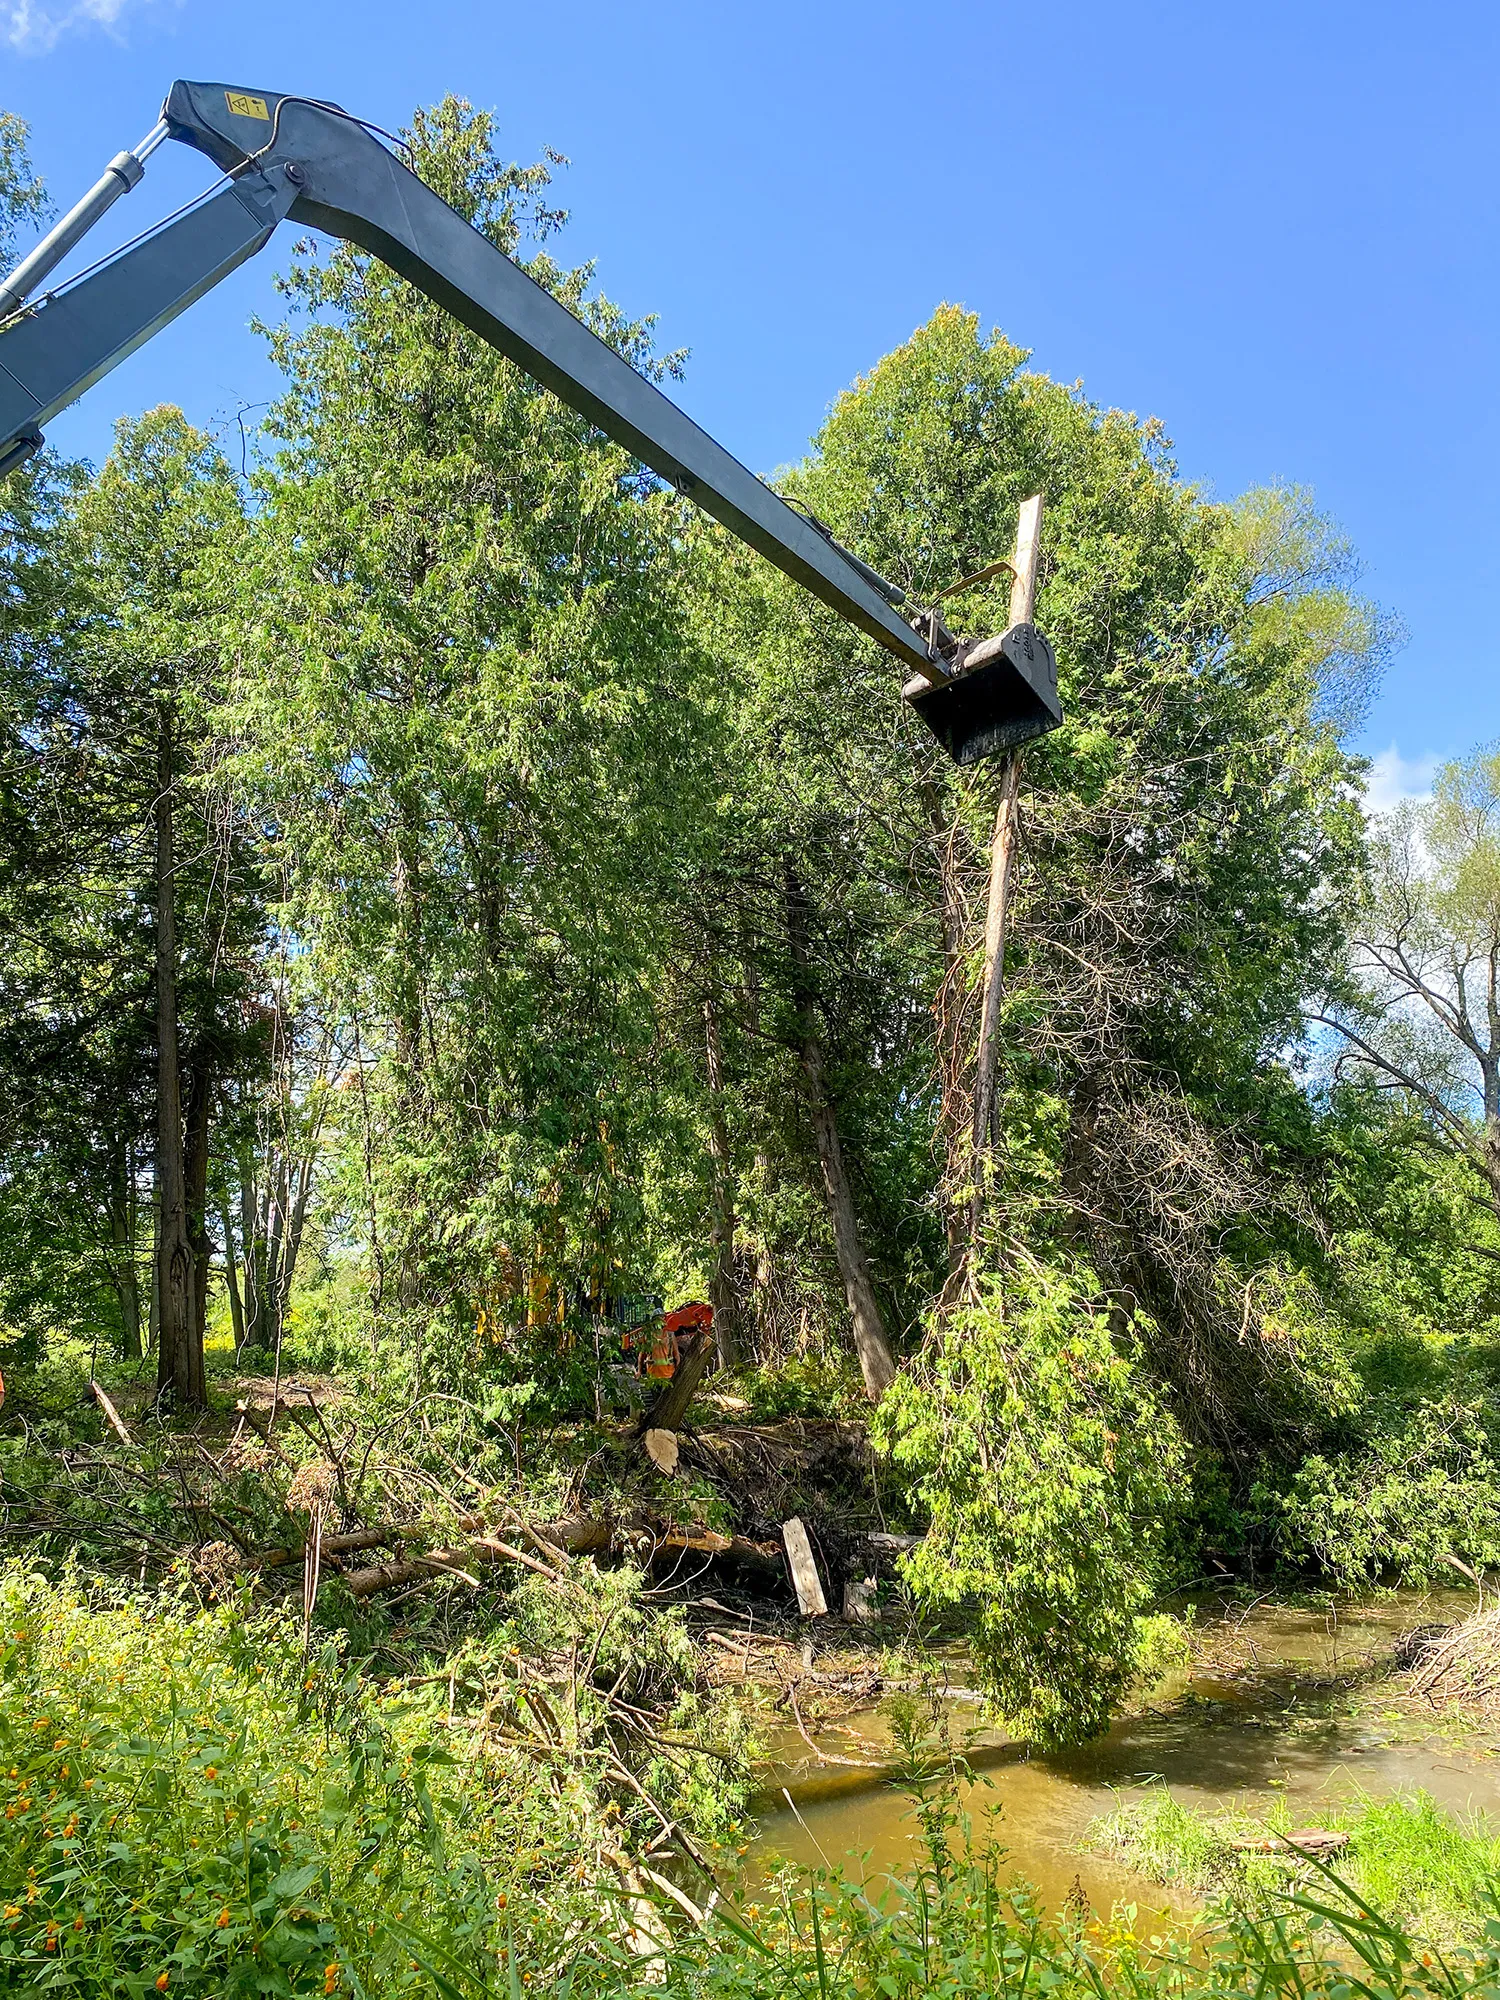 Excavator hoisting trees into place along river bank